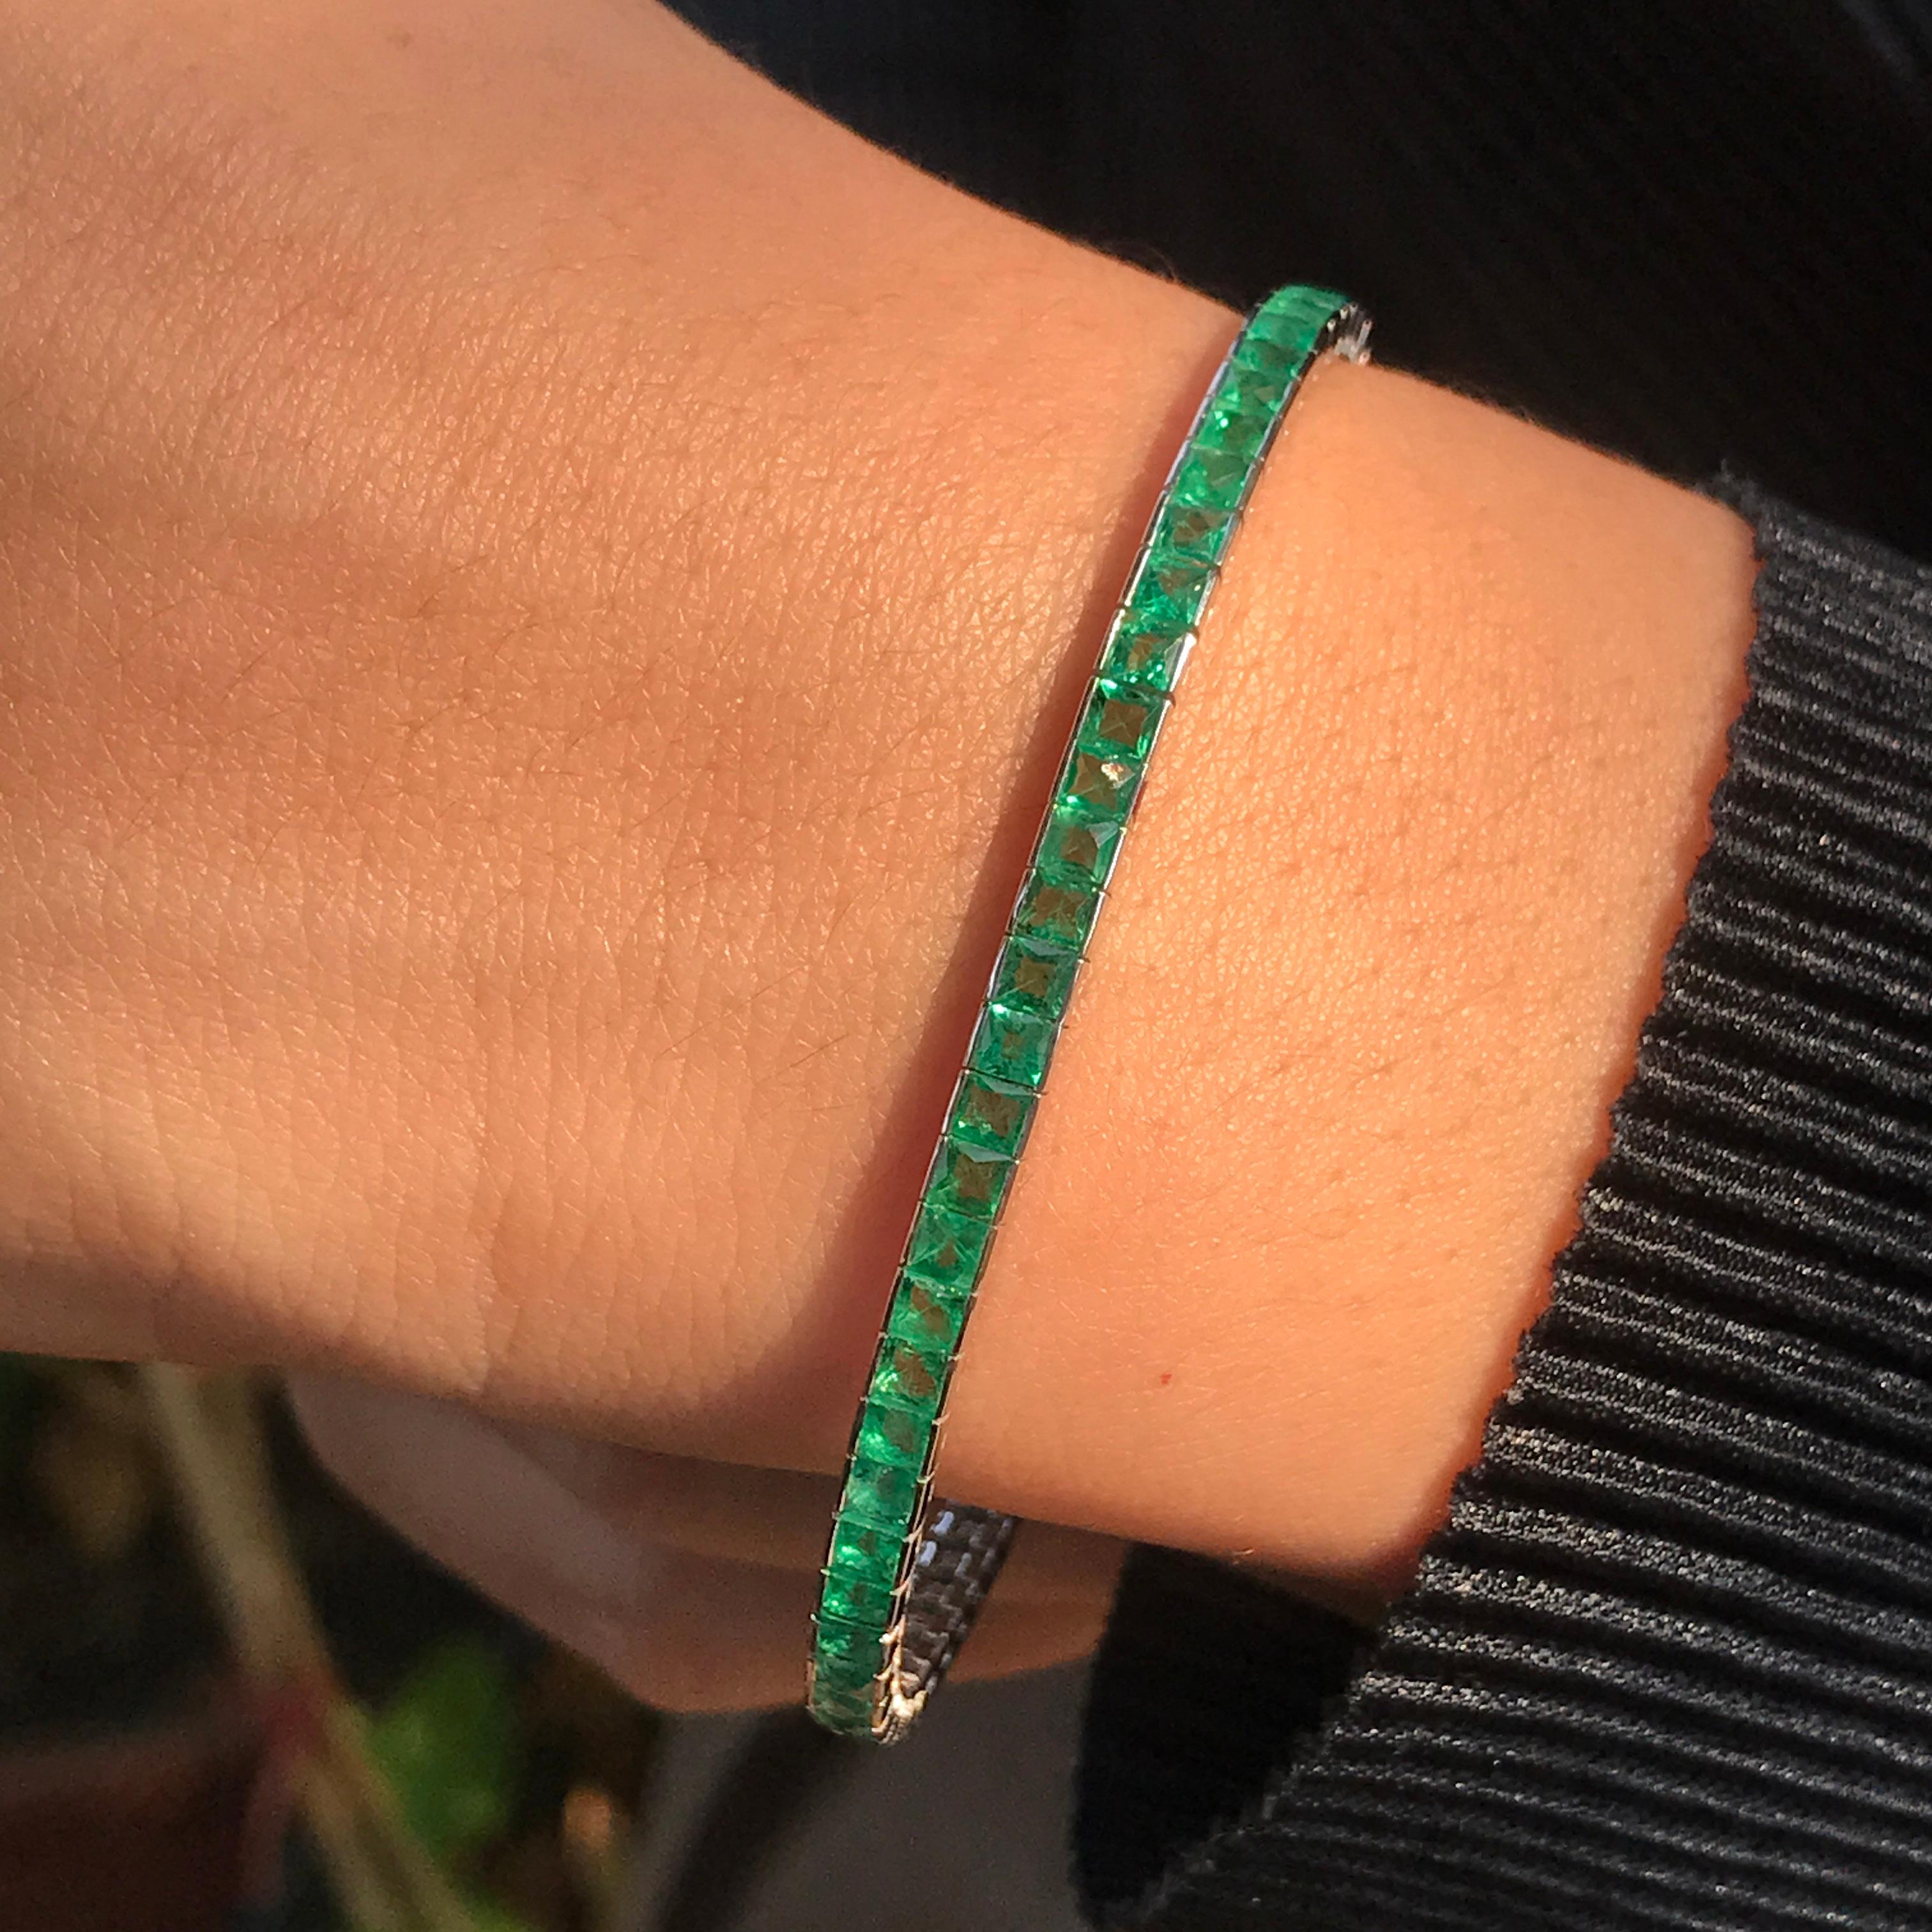 Enviably cool and sophisticated, this princess cut  emerald tennis bracelet reinterprets a familiar motif to create a tennis bracelet that is both contemporary and classic. Made of 18k white gold that contrasts beautifully with green emeralds, with